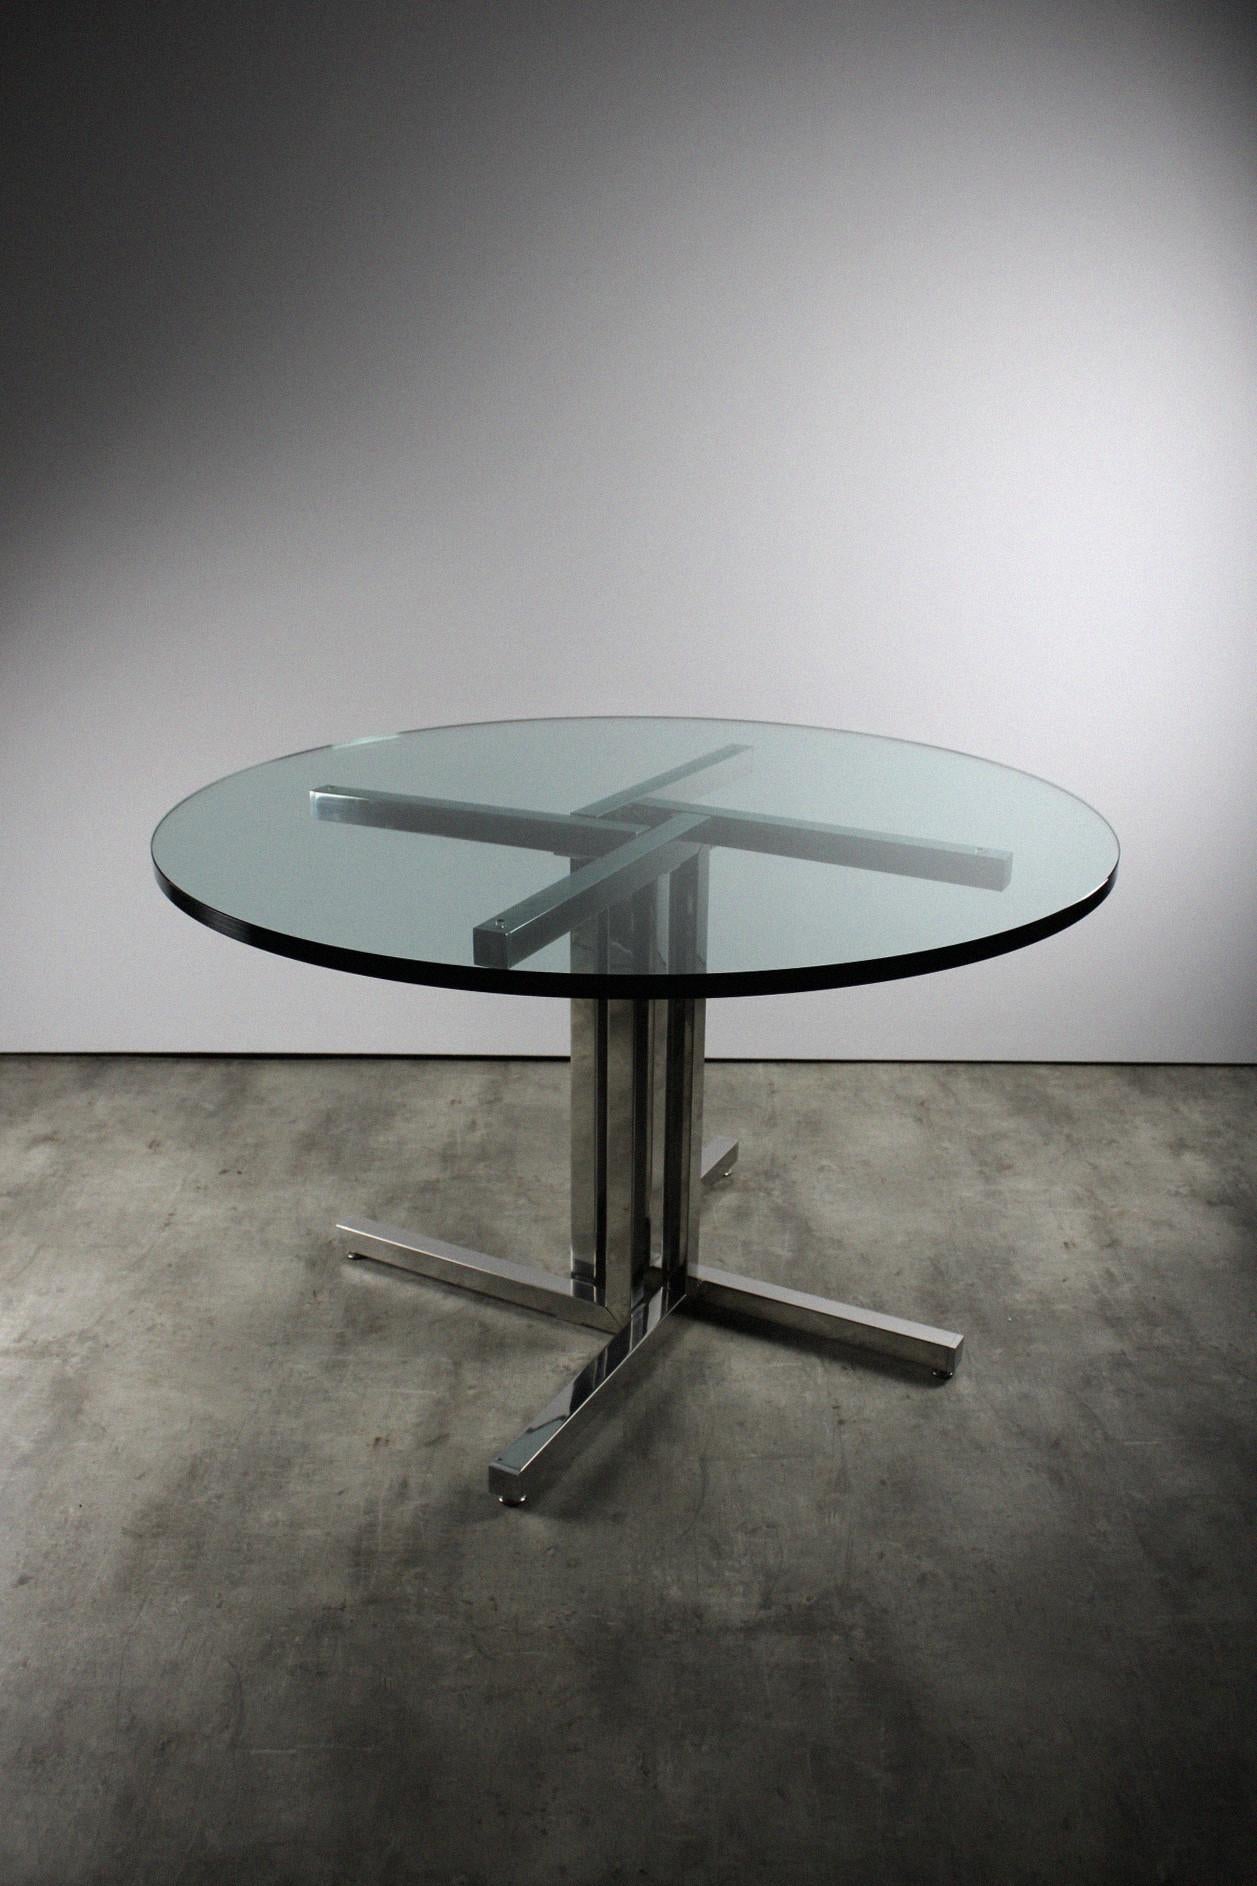 This dining table by Peter Ghyczy, is a unique piece where only one version was made. The combination of the smoked glass and chrome frame, instantly create a timeless appearance. Peter Ghyczy designed this model as a prototype and had this great